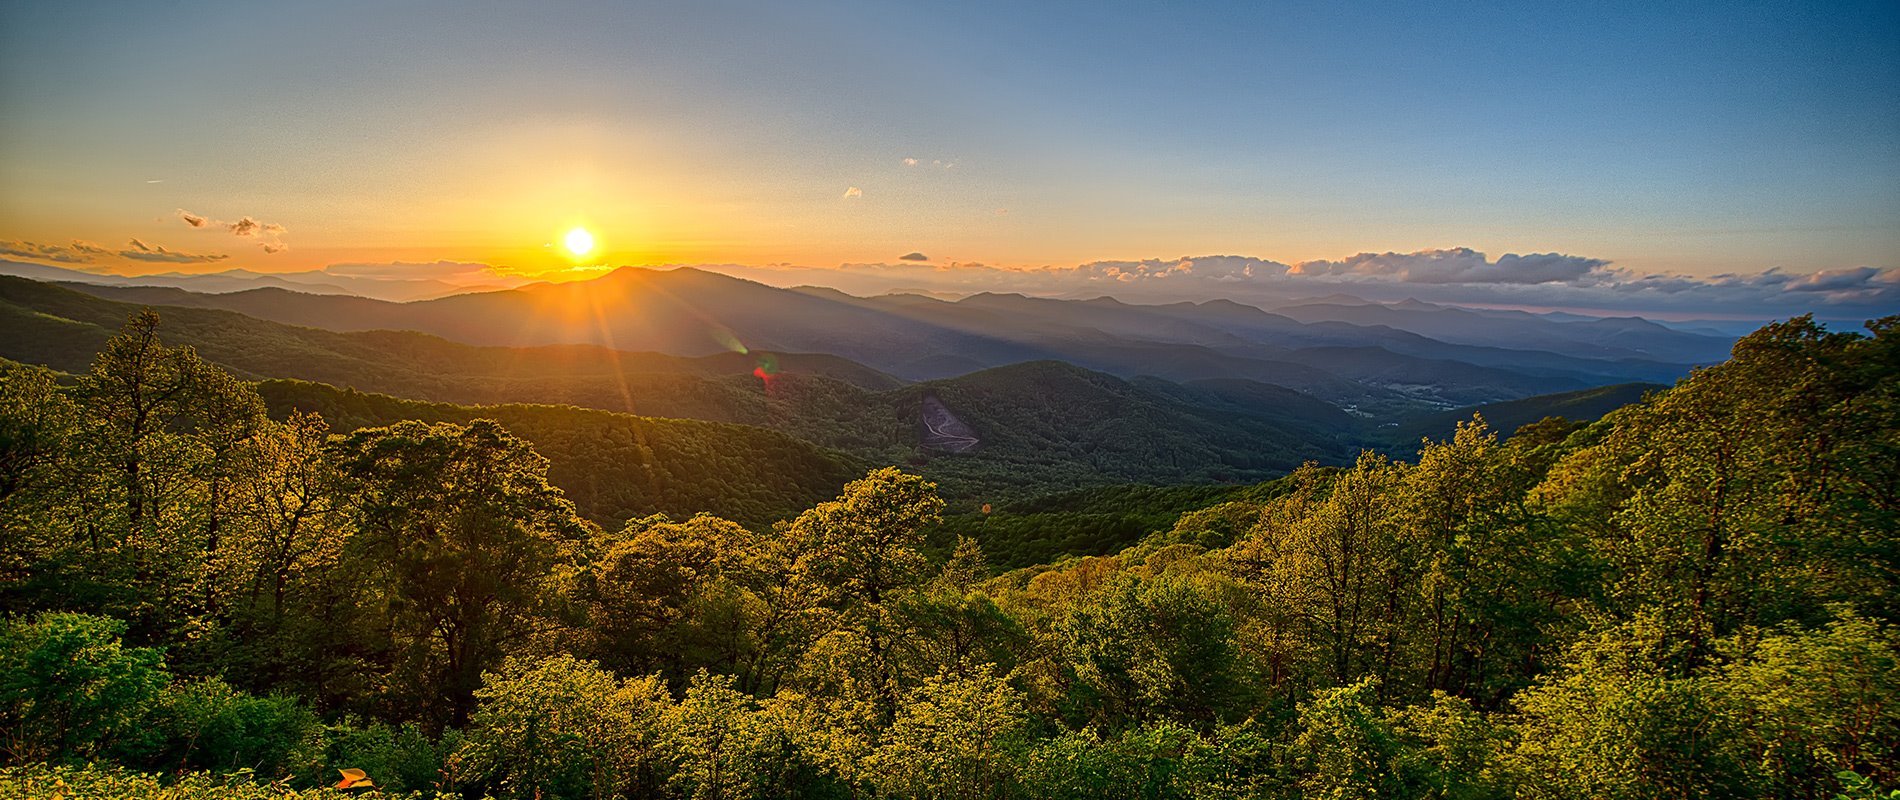 The Best Places To Vacation In Virginia